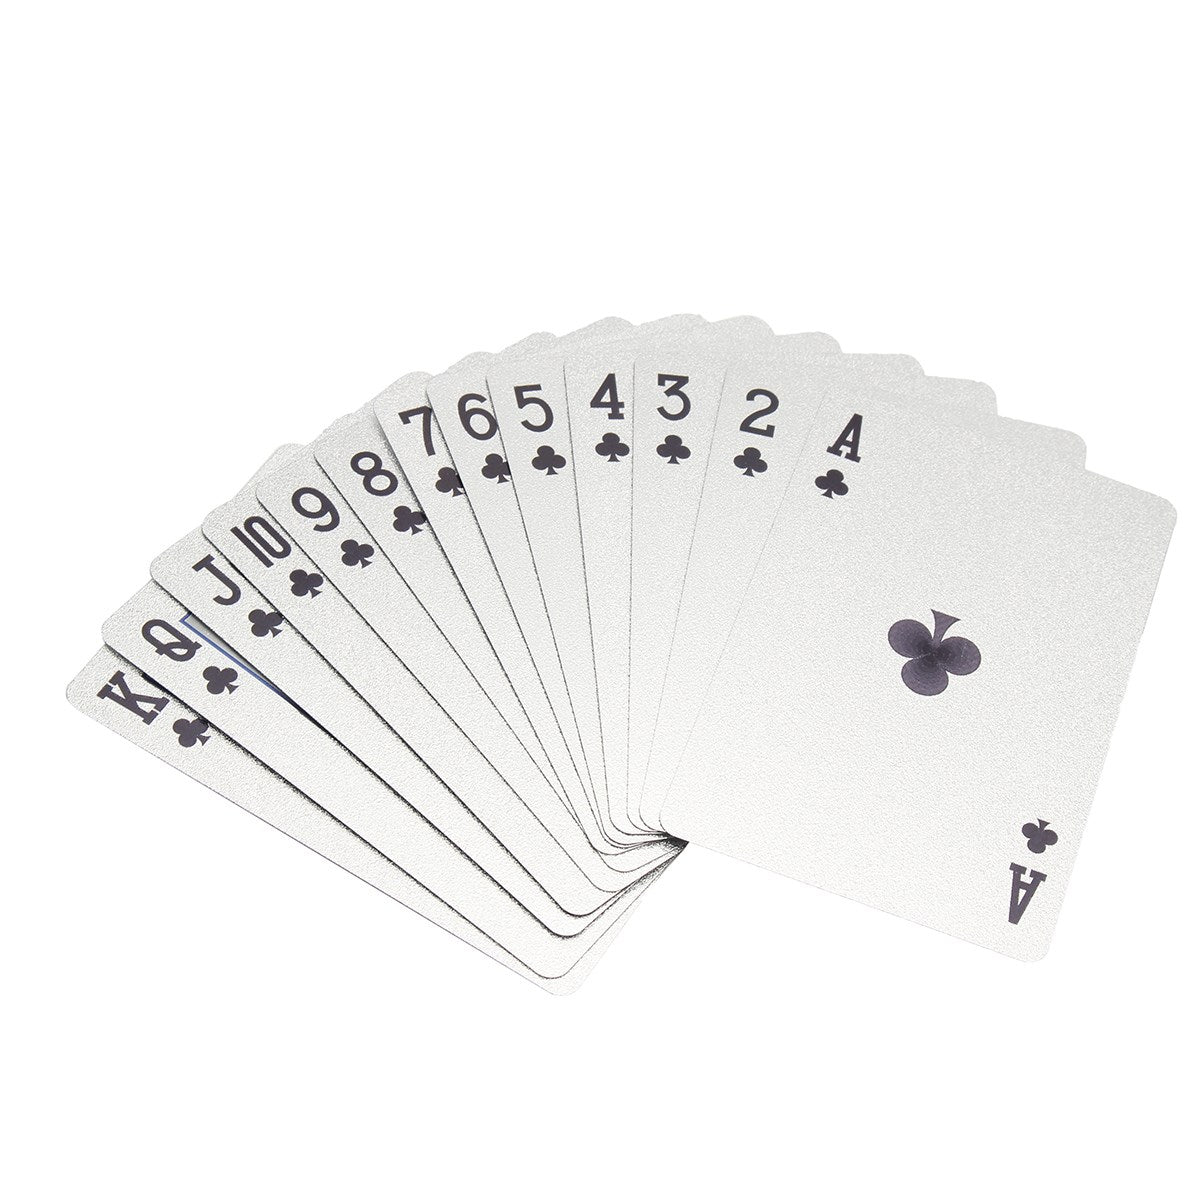 Royal Polished Silver & Gold Playing Cards